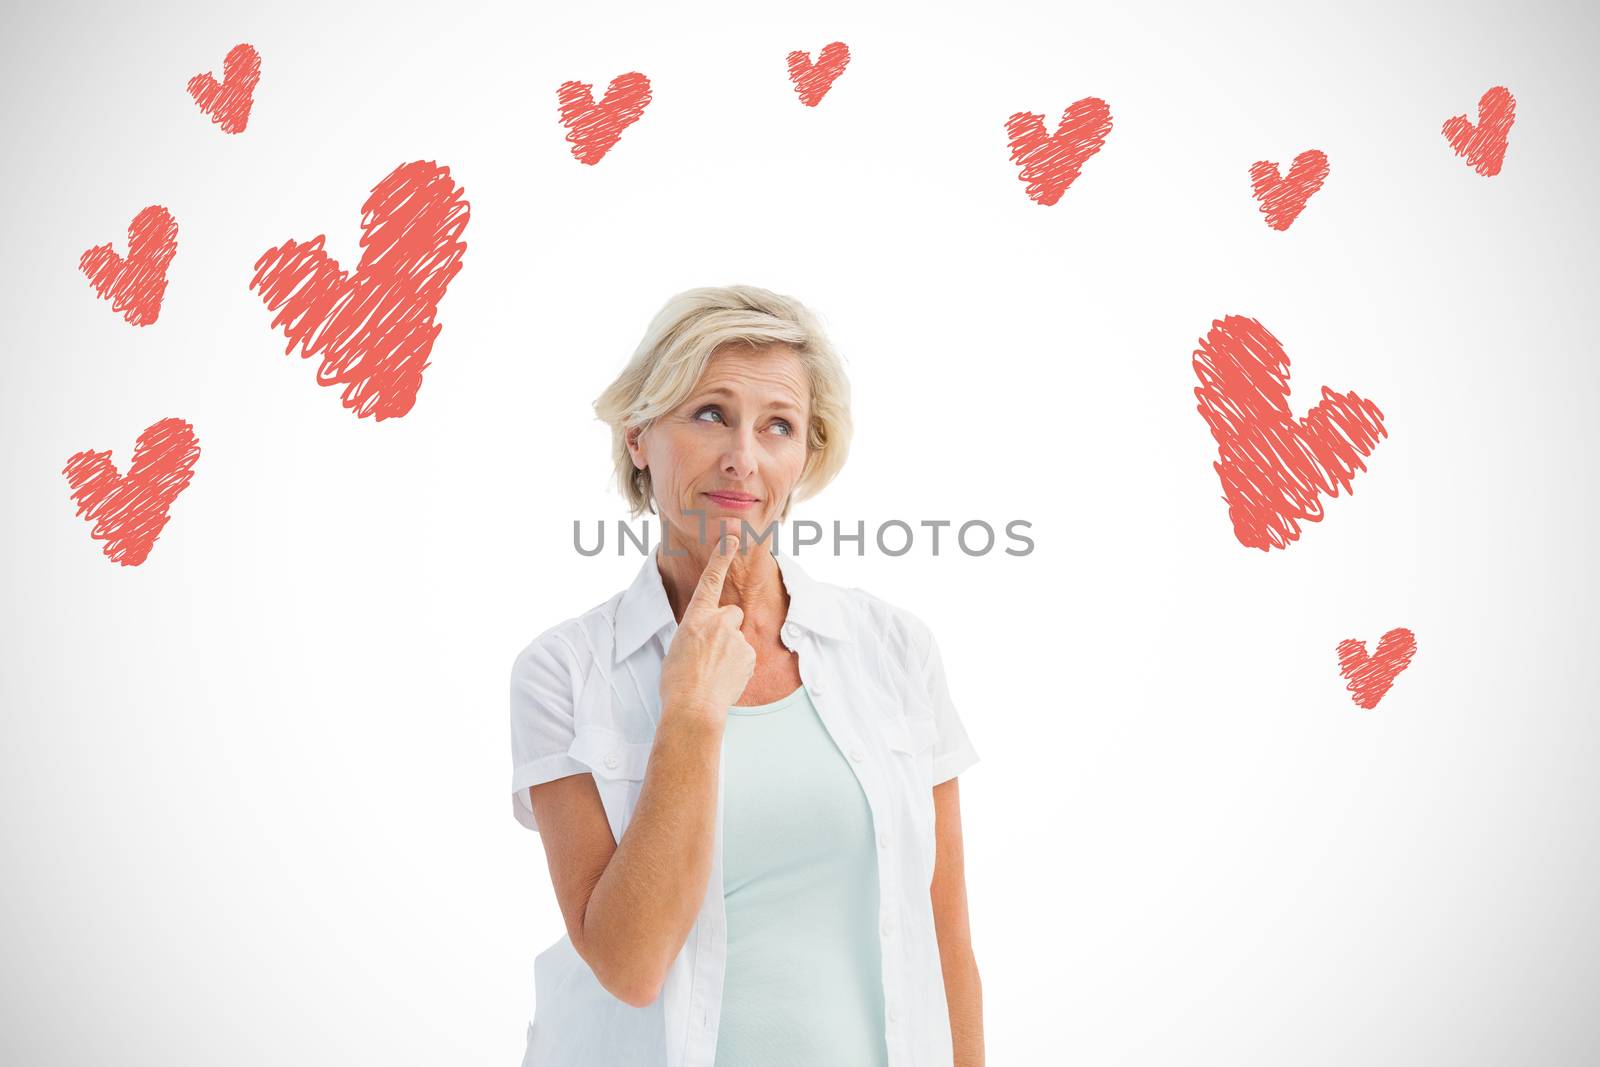 Mature woman thinking with hand on chin against white background with vignette